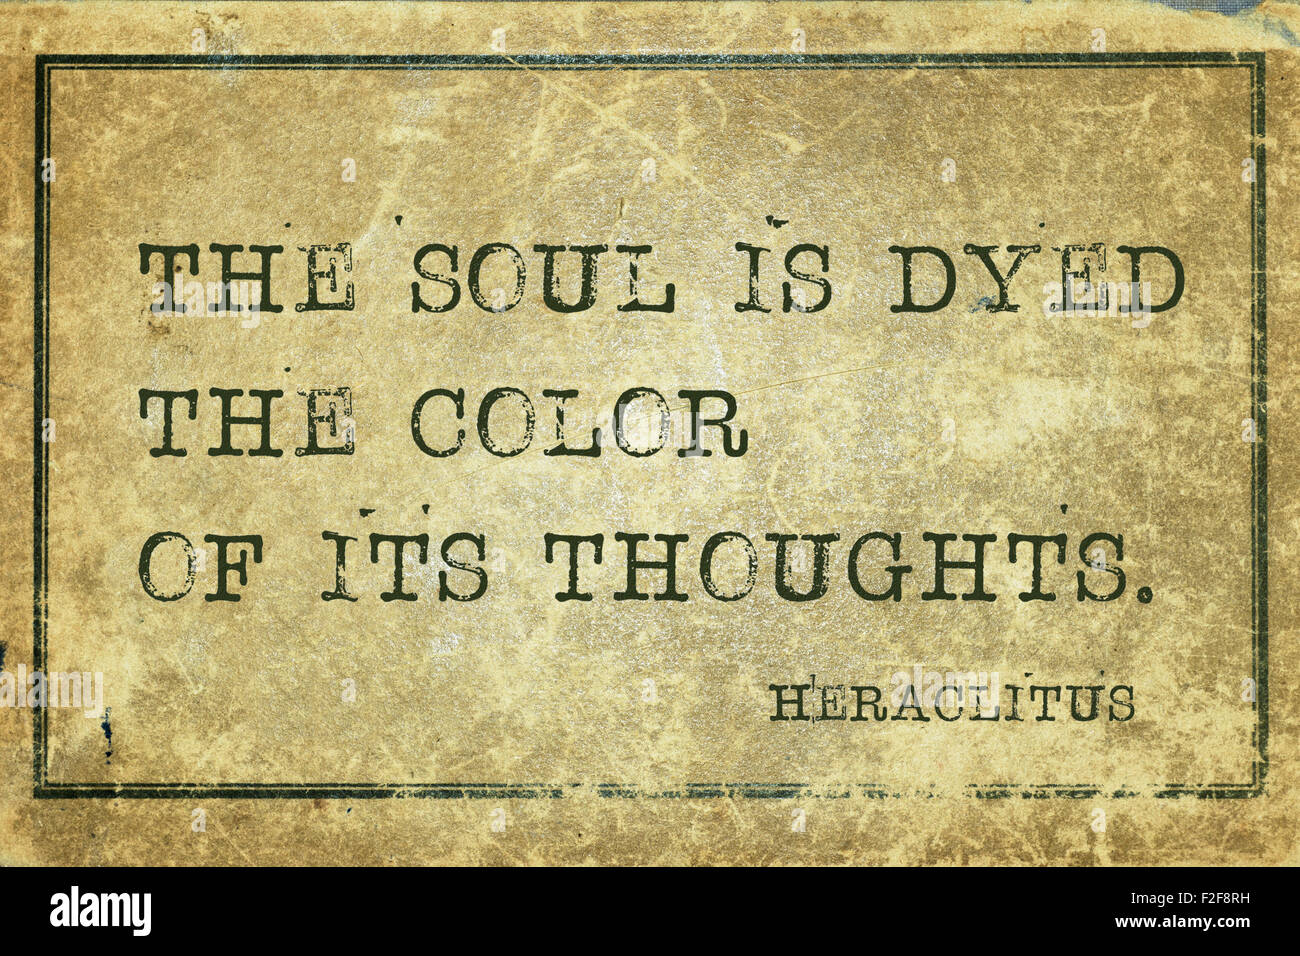 The soul is dyed the color of its thoughts - ancient Greek philosopher Heraclitus quote printed on grunge vintage cardboard Stock Photo